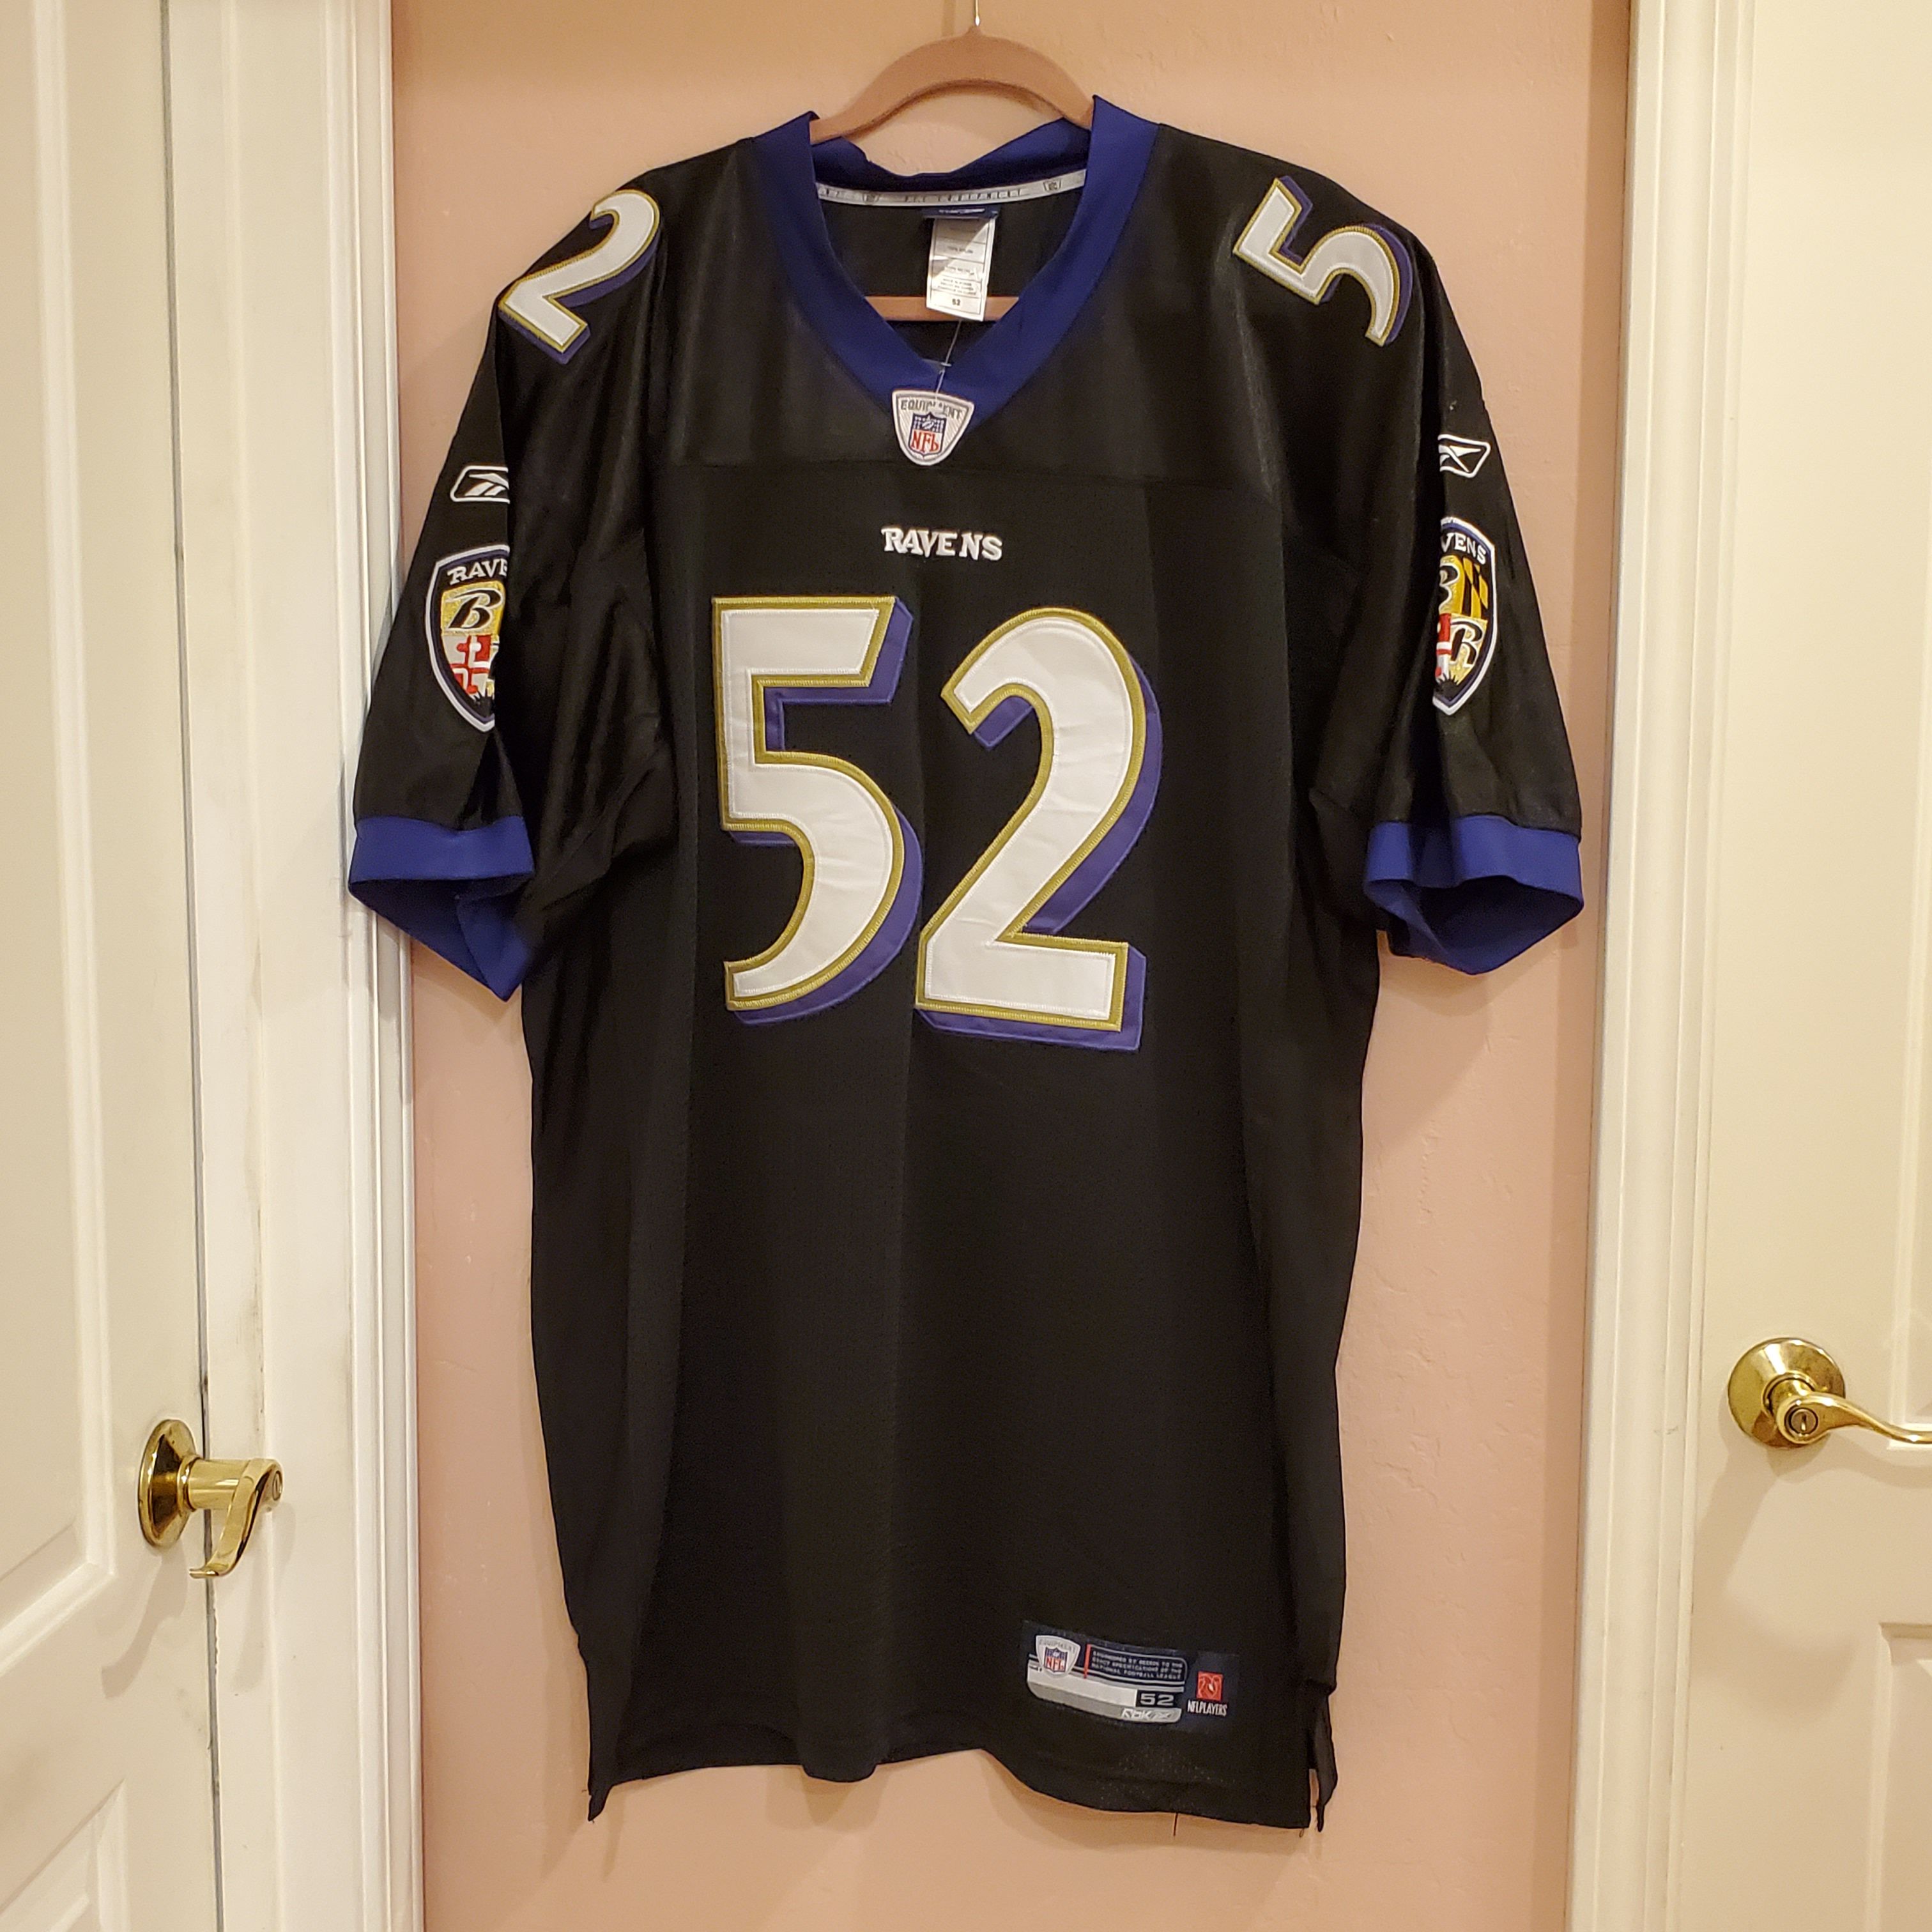 Reebok R. Lewis Baltimore Ravens NFL Jersey #52 Stitched Sewn Sz 52 New, with tag.